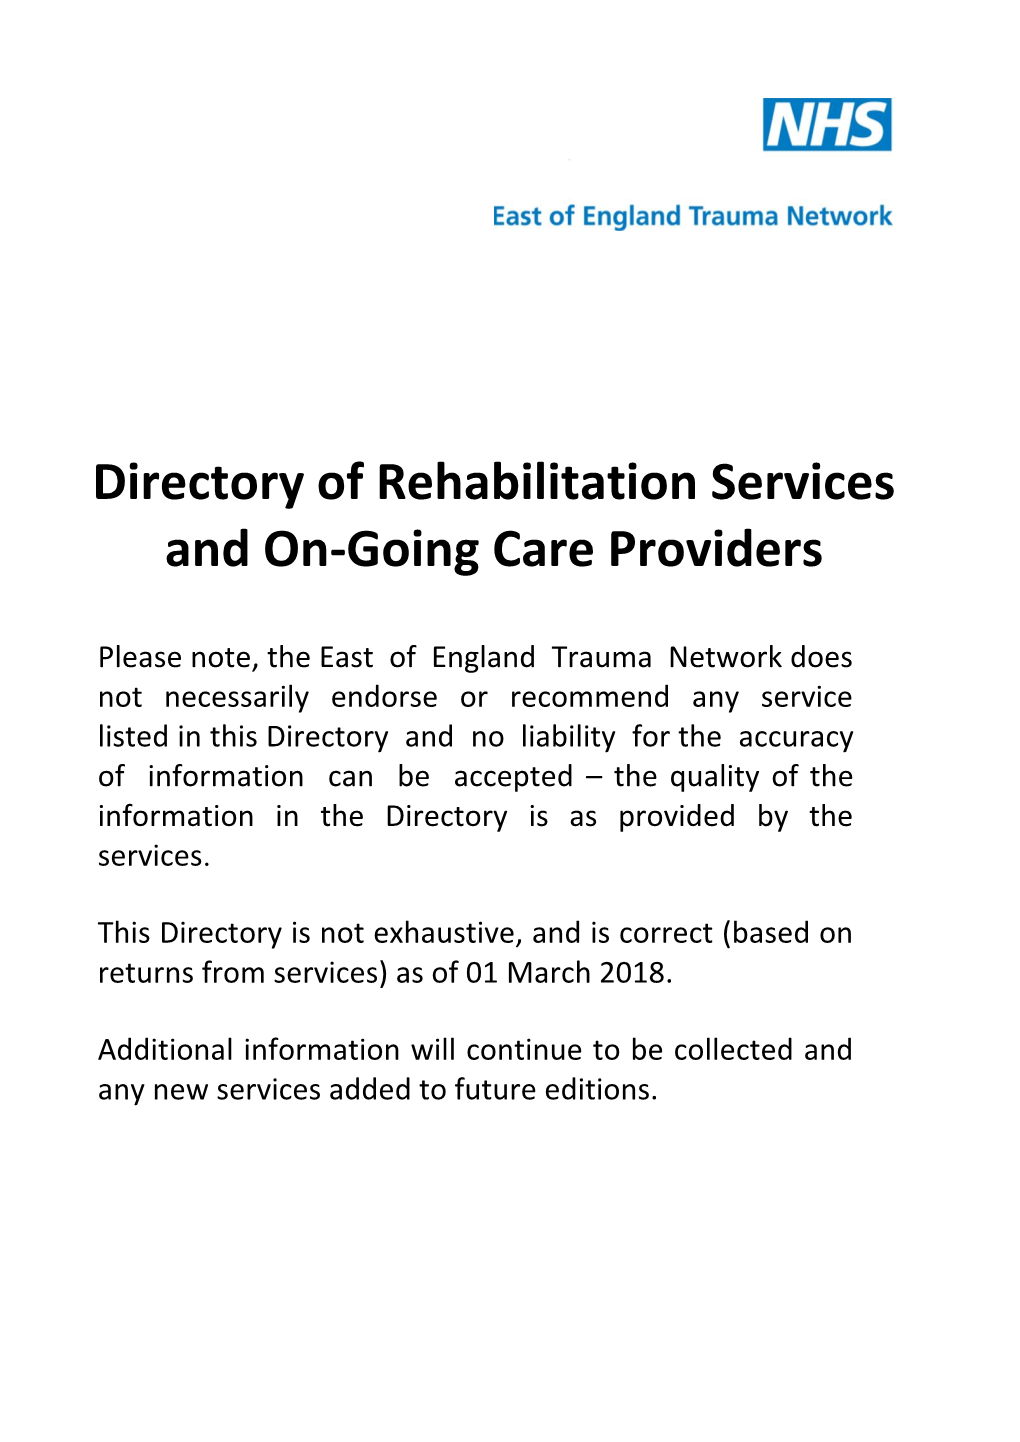 Directory of Rehabilitation Services and On-Going Care Providers